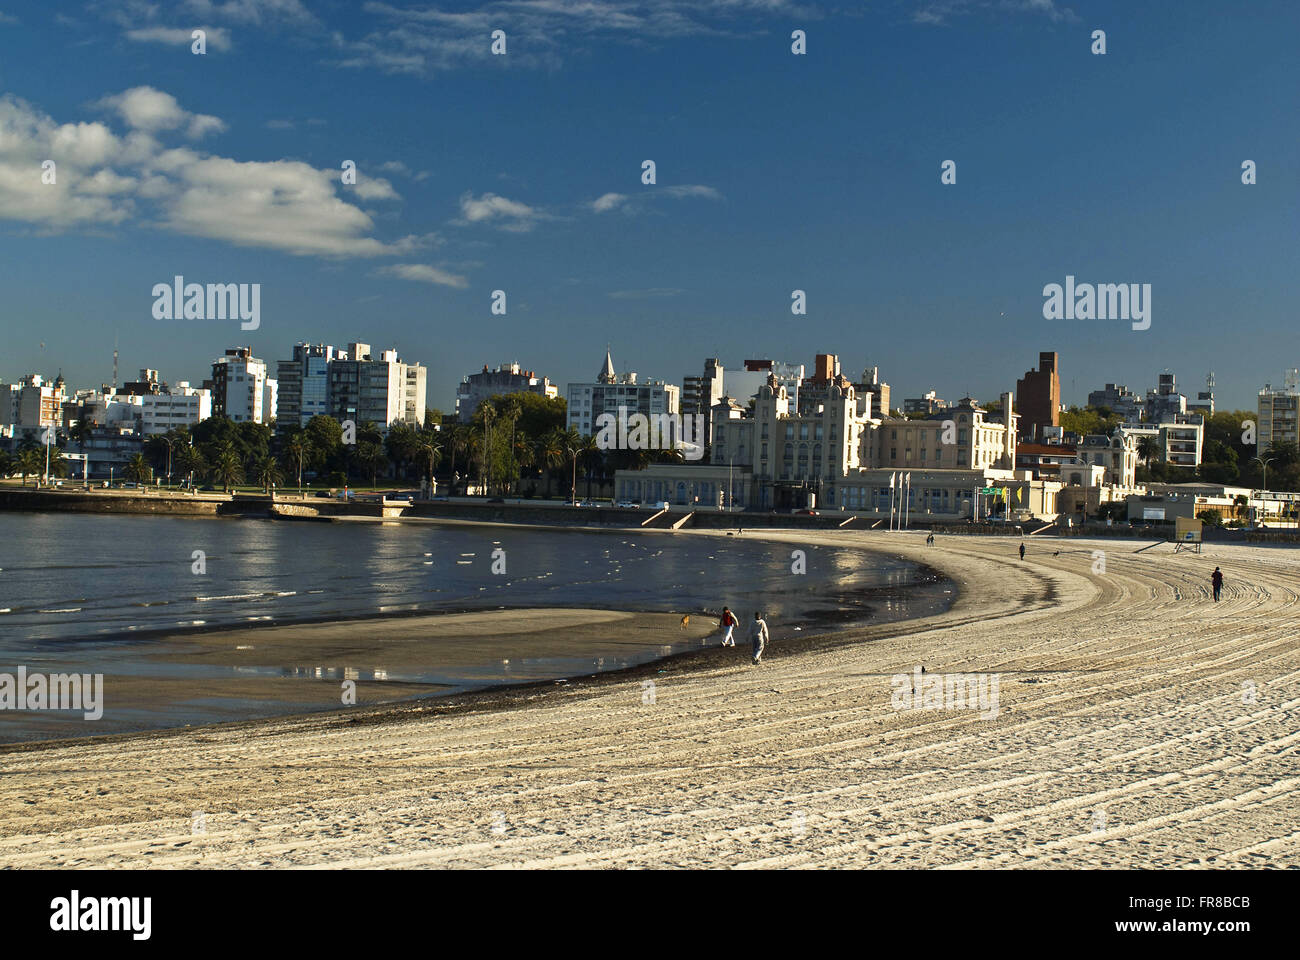 Neighborhood and Pocitos beach on the shore of the River Plate in the city of Montevideuu Stock Photo